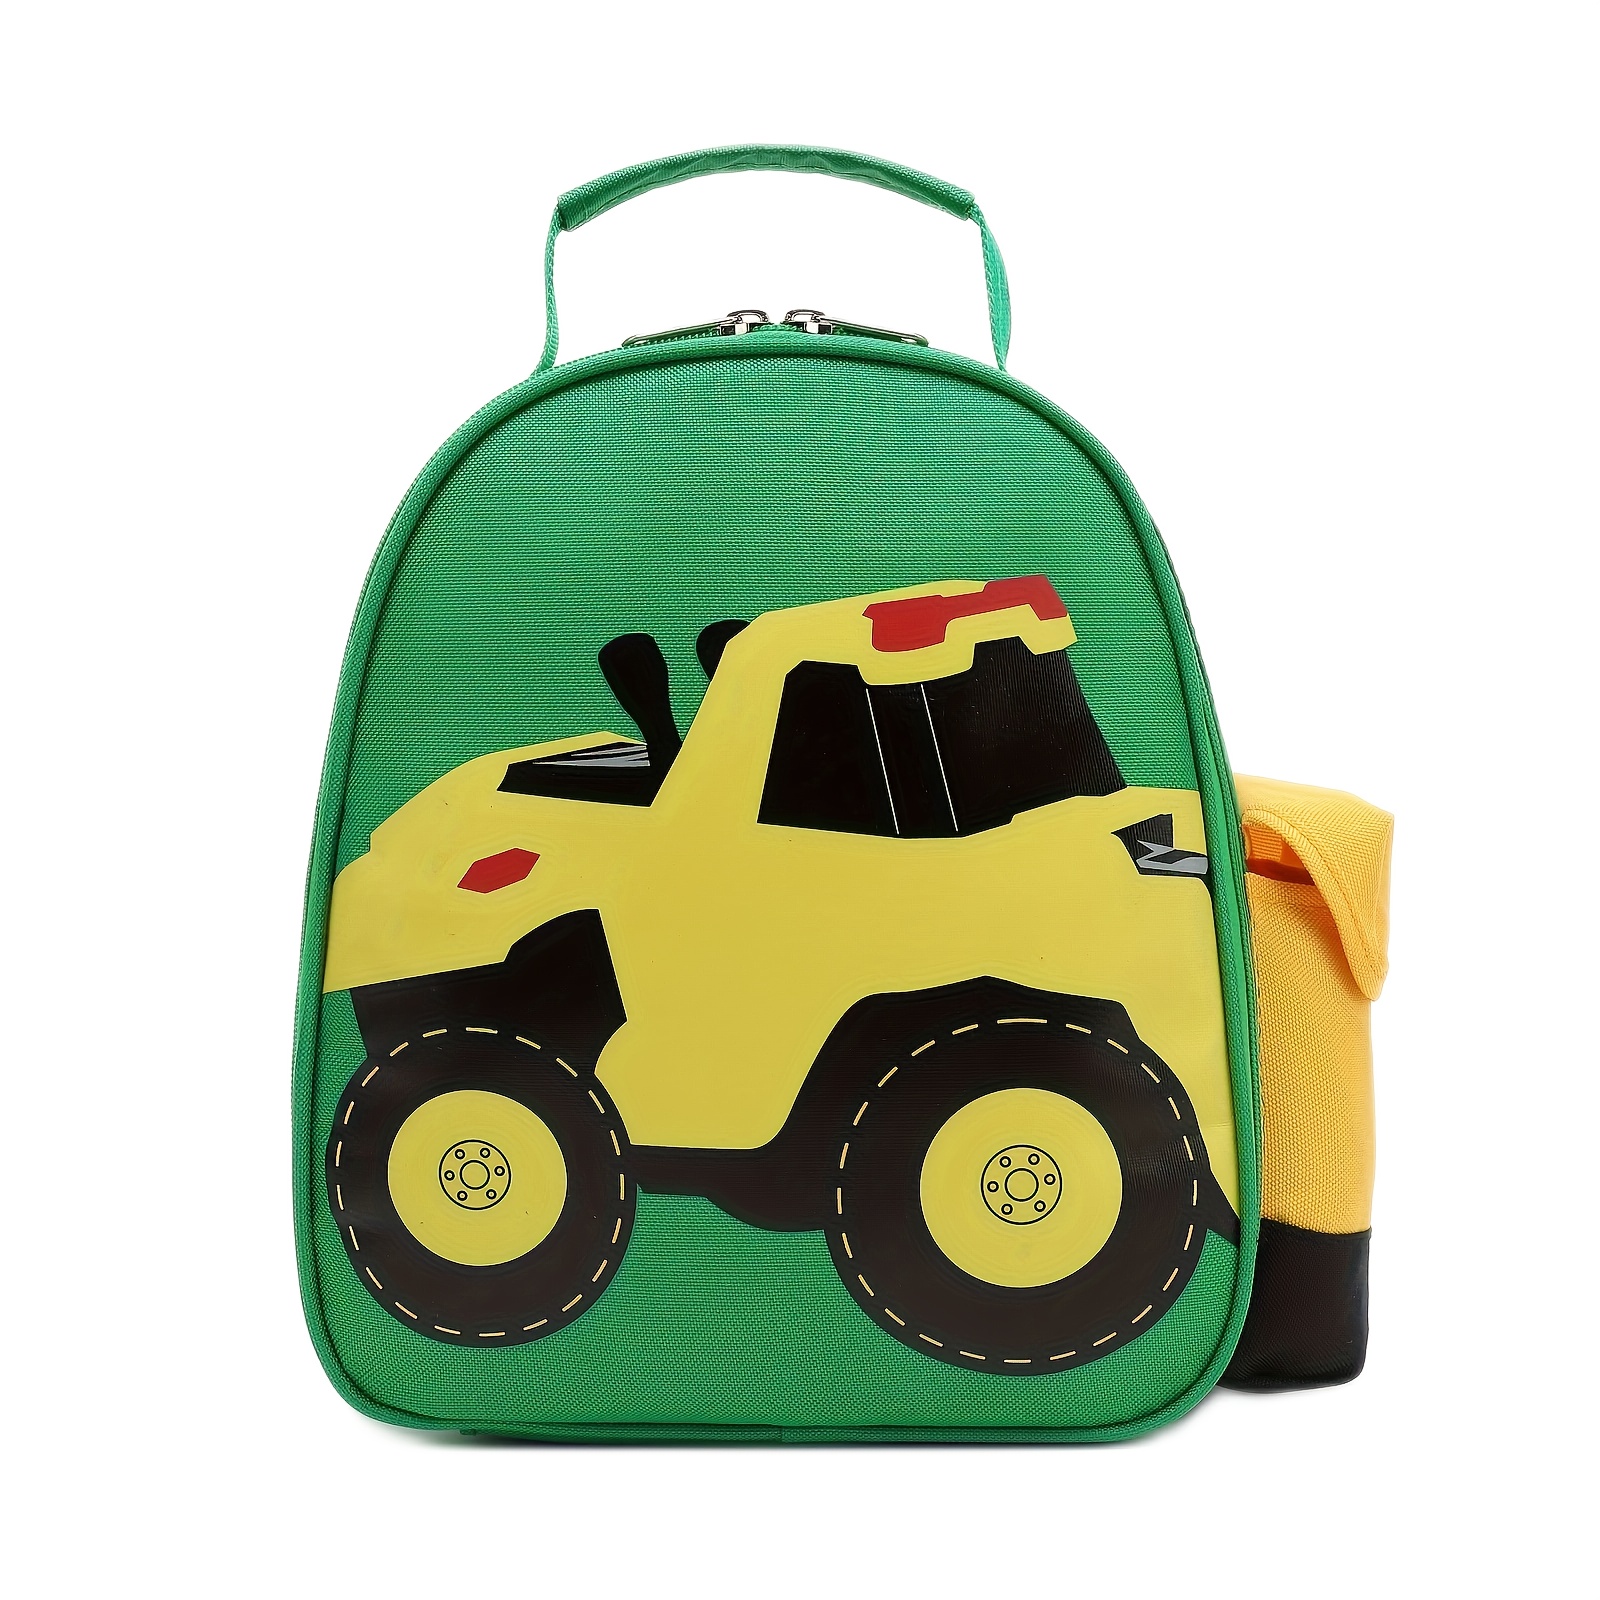 Insulated Lunch Box for Kids Boys Girls School Lunch Bags Reusable